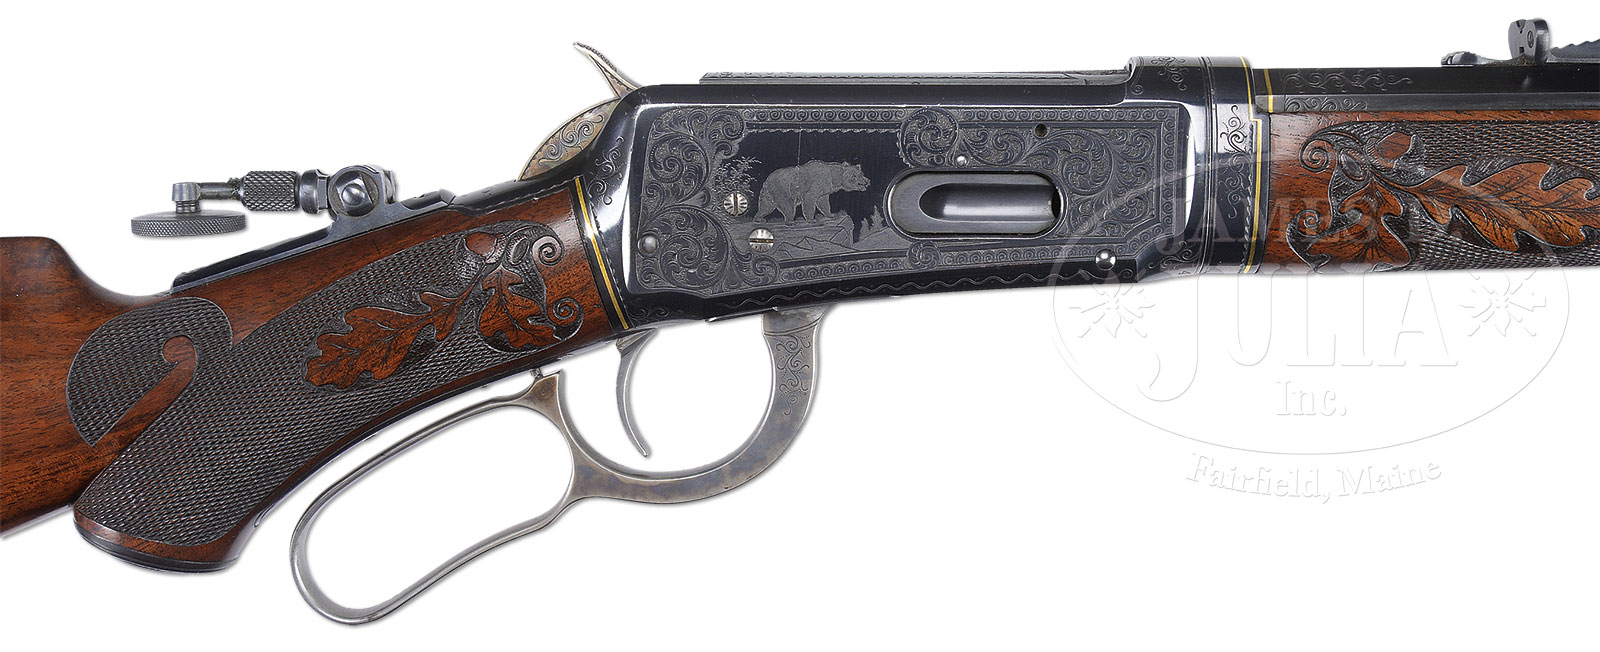 SPECTACULAR WINCHESTER MODEL 1894 DELUXE TAKEDOWN RIFLE FACTORY ENGRAVED BY ONE OF THE ULRICHS IN #8 PATTERN.